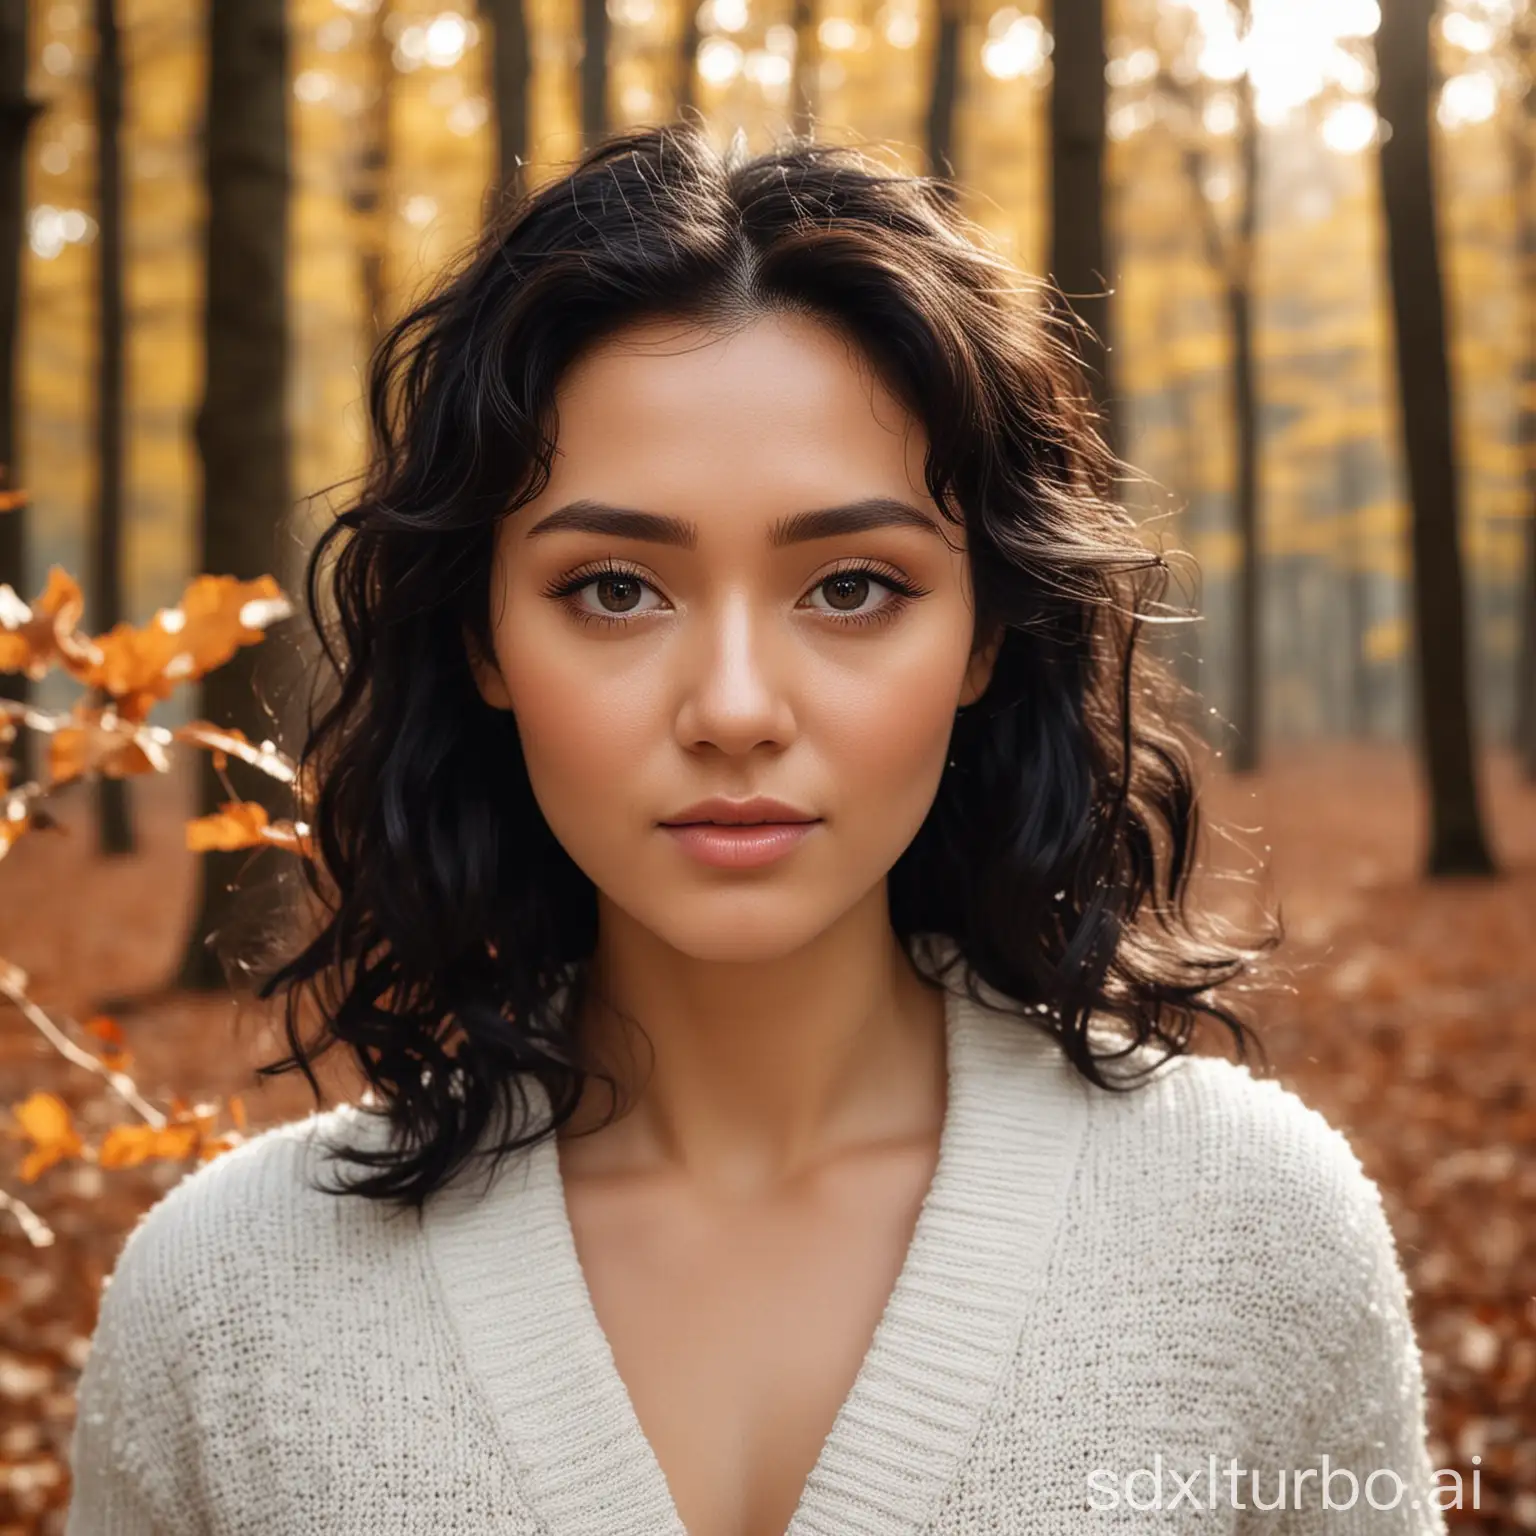 A woman wearing a white knitted cardigan looks at the camera with black shiny, slightly curly hair, clean makeup, set against a backdrop of a breeze, brawn woods, and fallen leaves, with a hazy feeling and blurred background. It appears to be a Canon shot portrait photo, with a style reference of gongli.